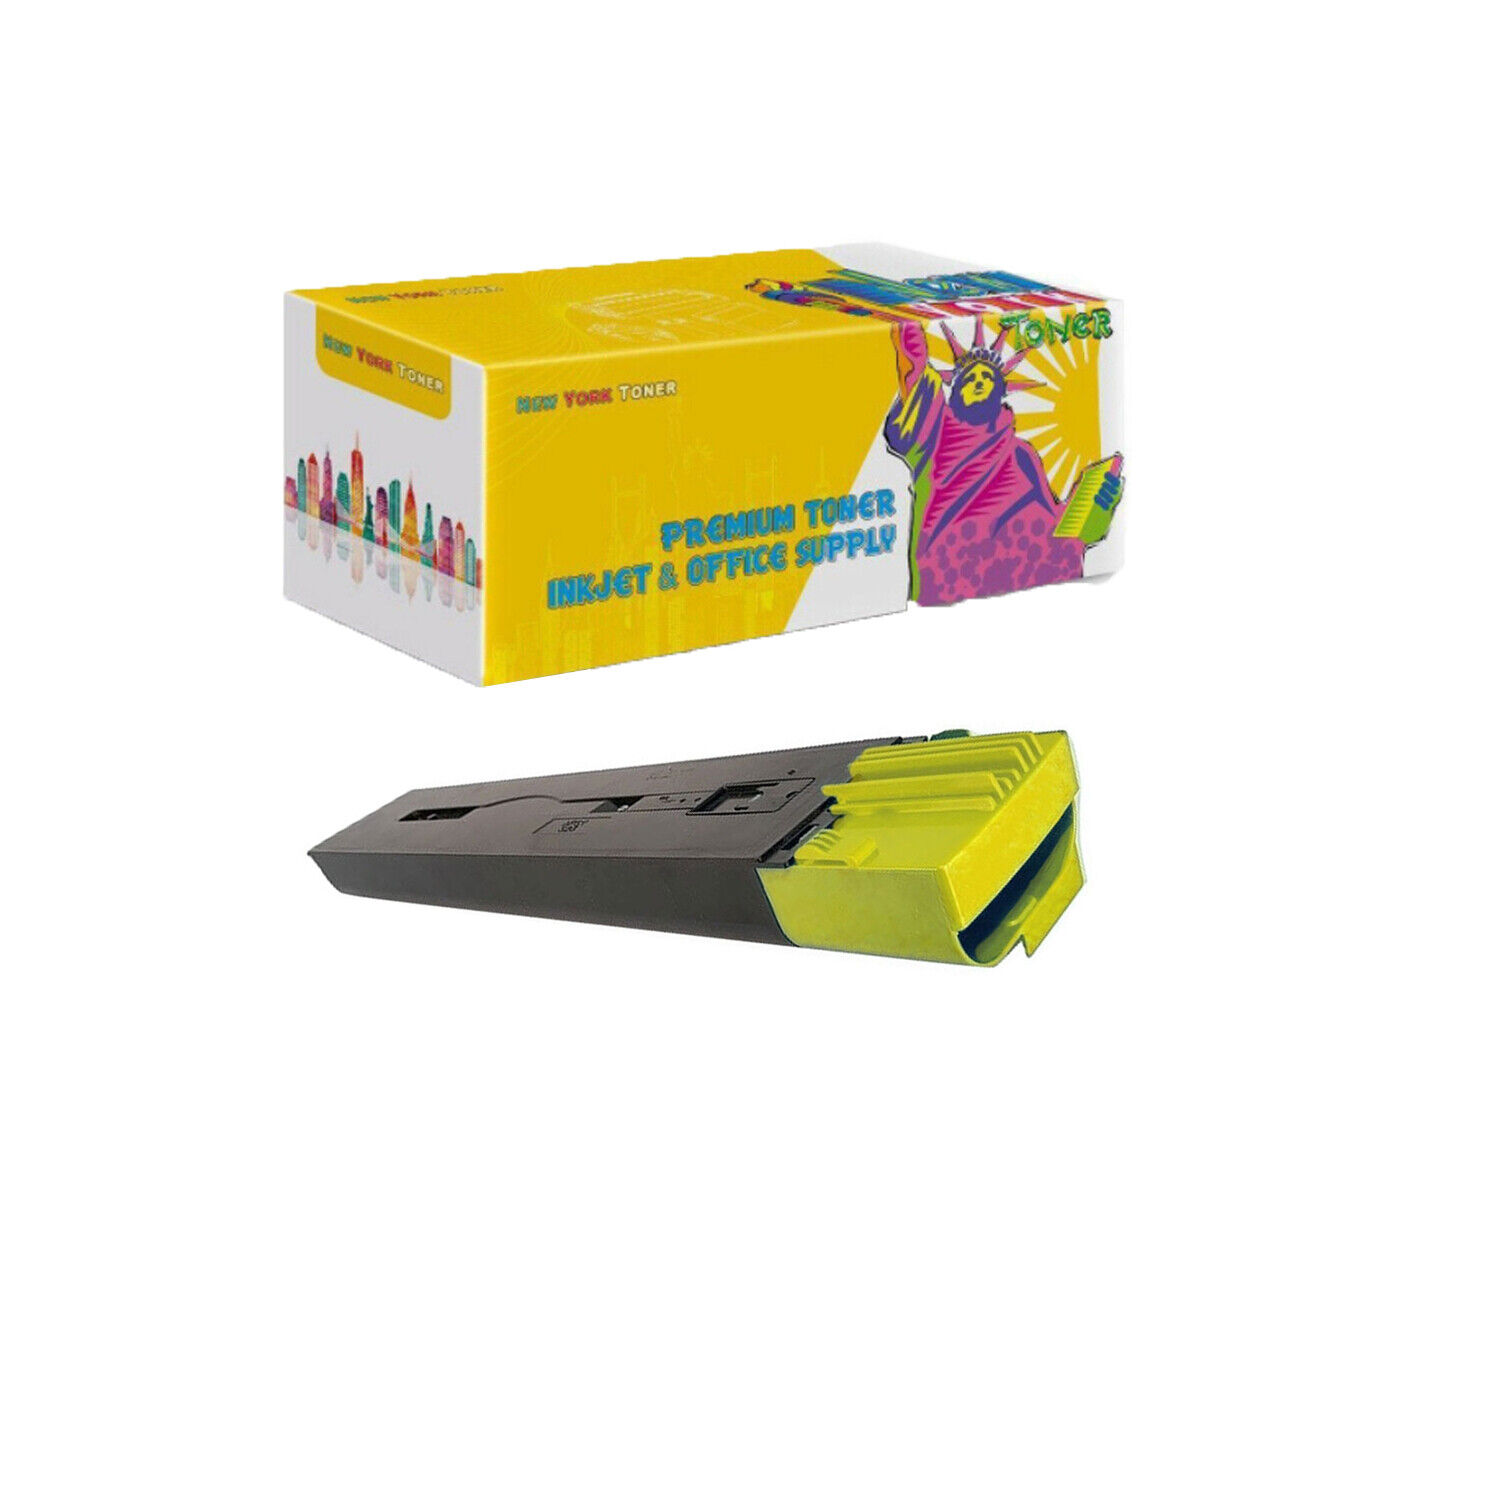 Remanufactured Toner METERED 006R01522 6R1522 Yellow for Xerox Color Press C60